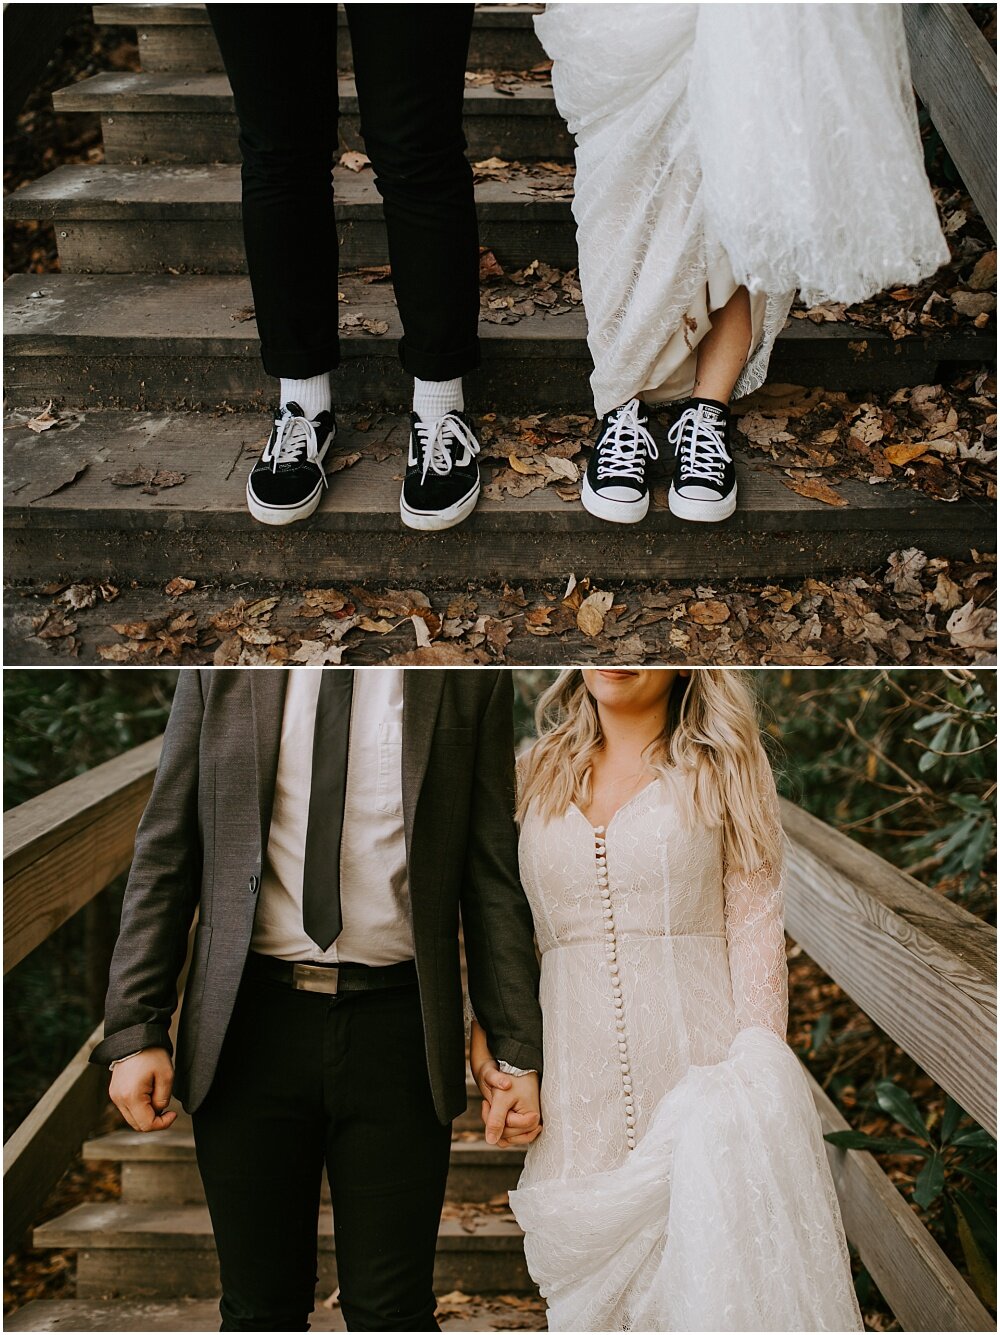 Bride and grooms shoes and wedding day outfits.